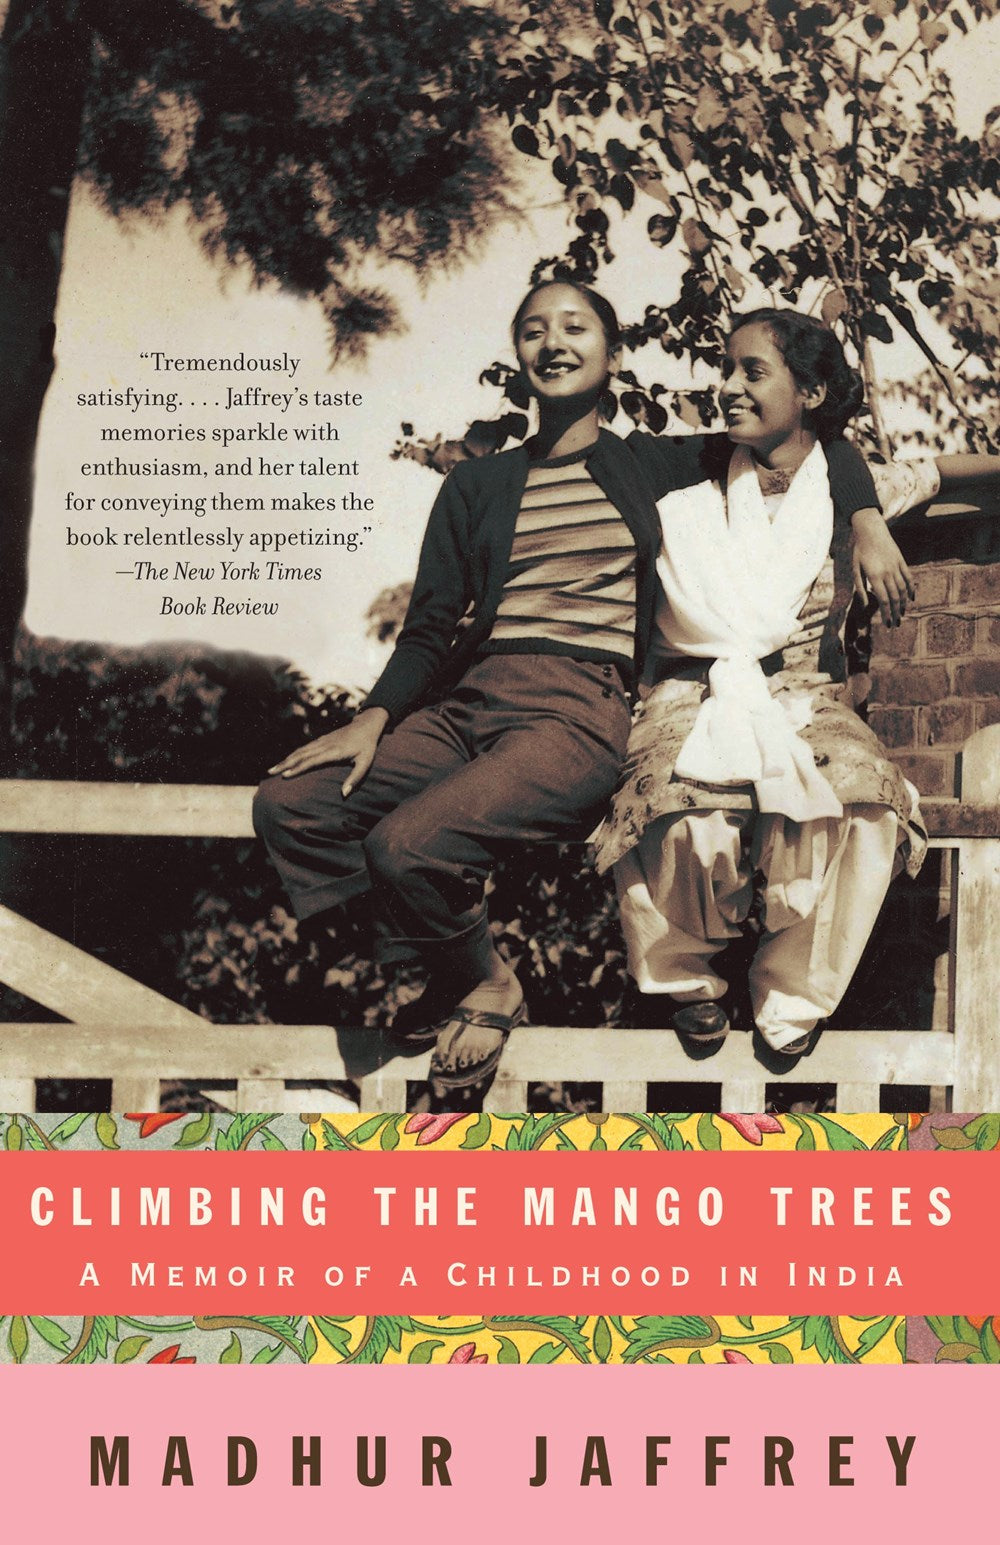 Climbing the Mango Trees: A Memoir of a Childhood in India by Madhur Jaffrey